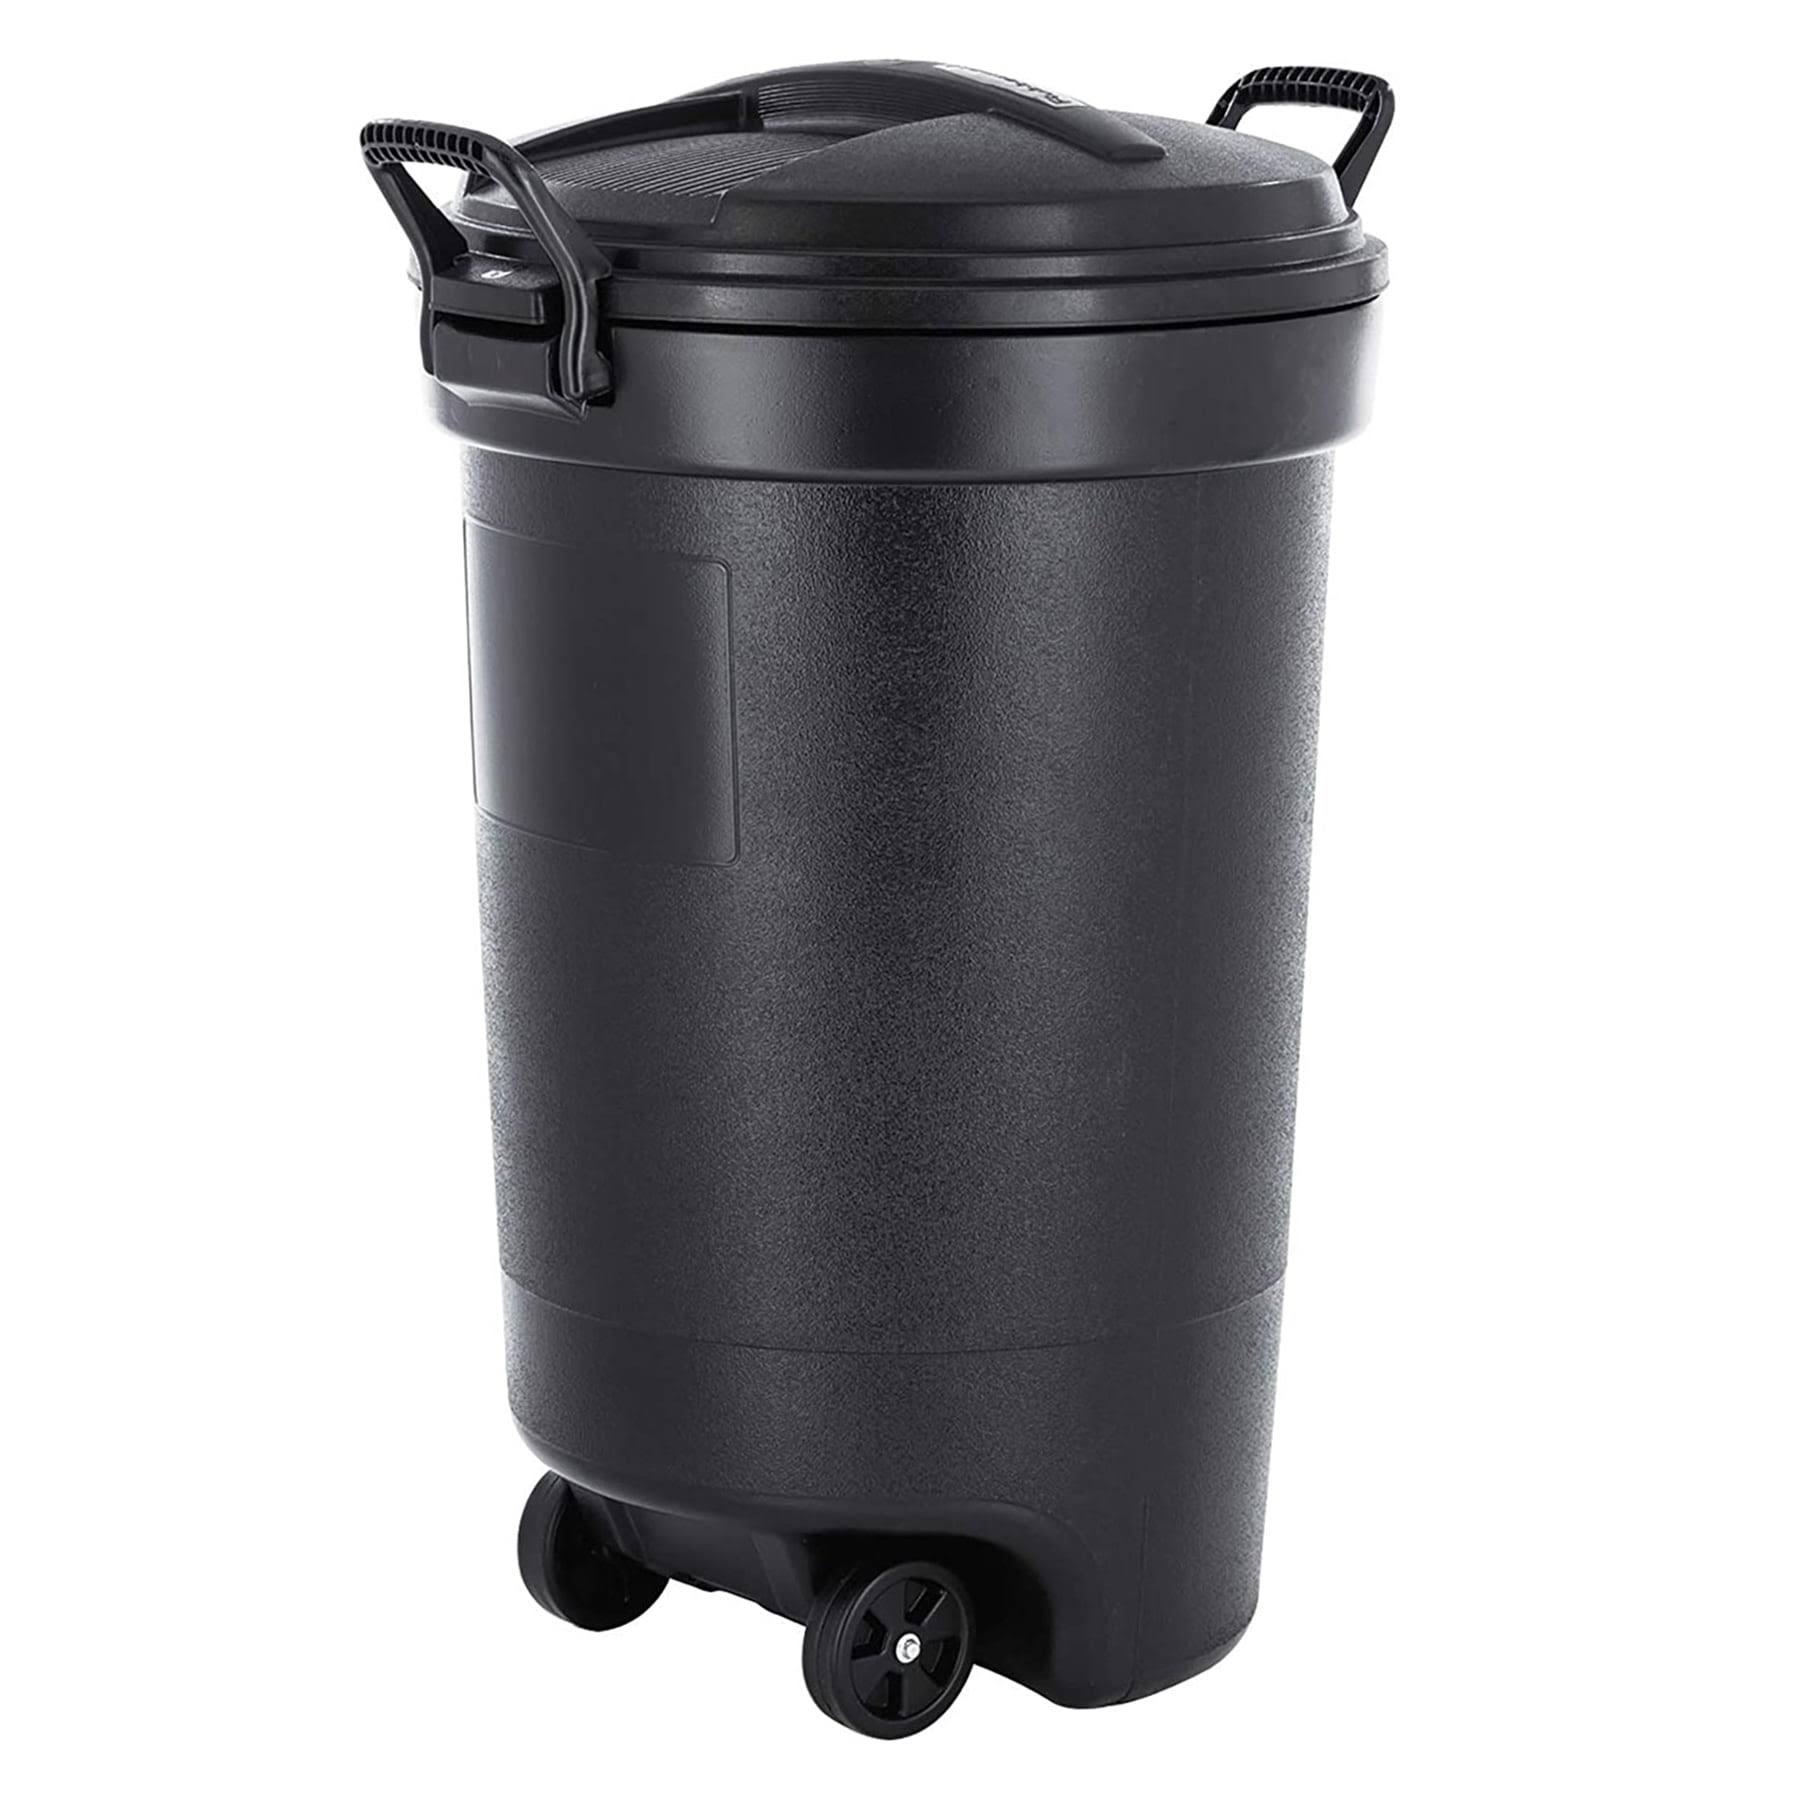 United Solutions Rubbermaid Wheeled Round Trash Can - Black, 32 Gallon